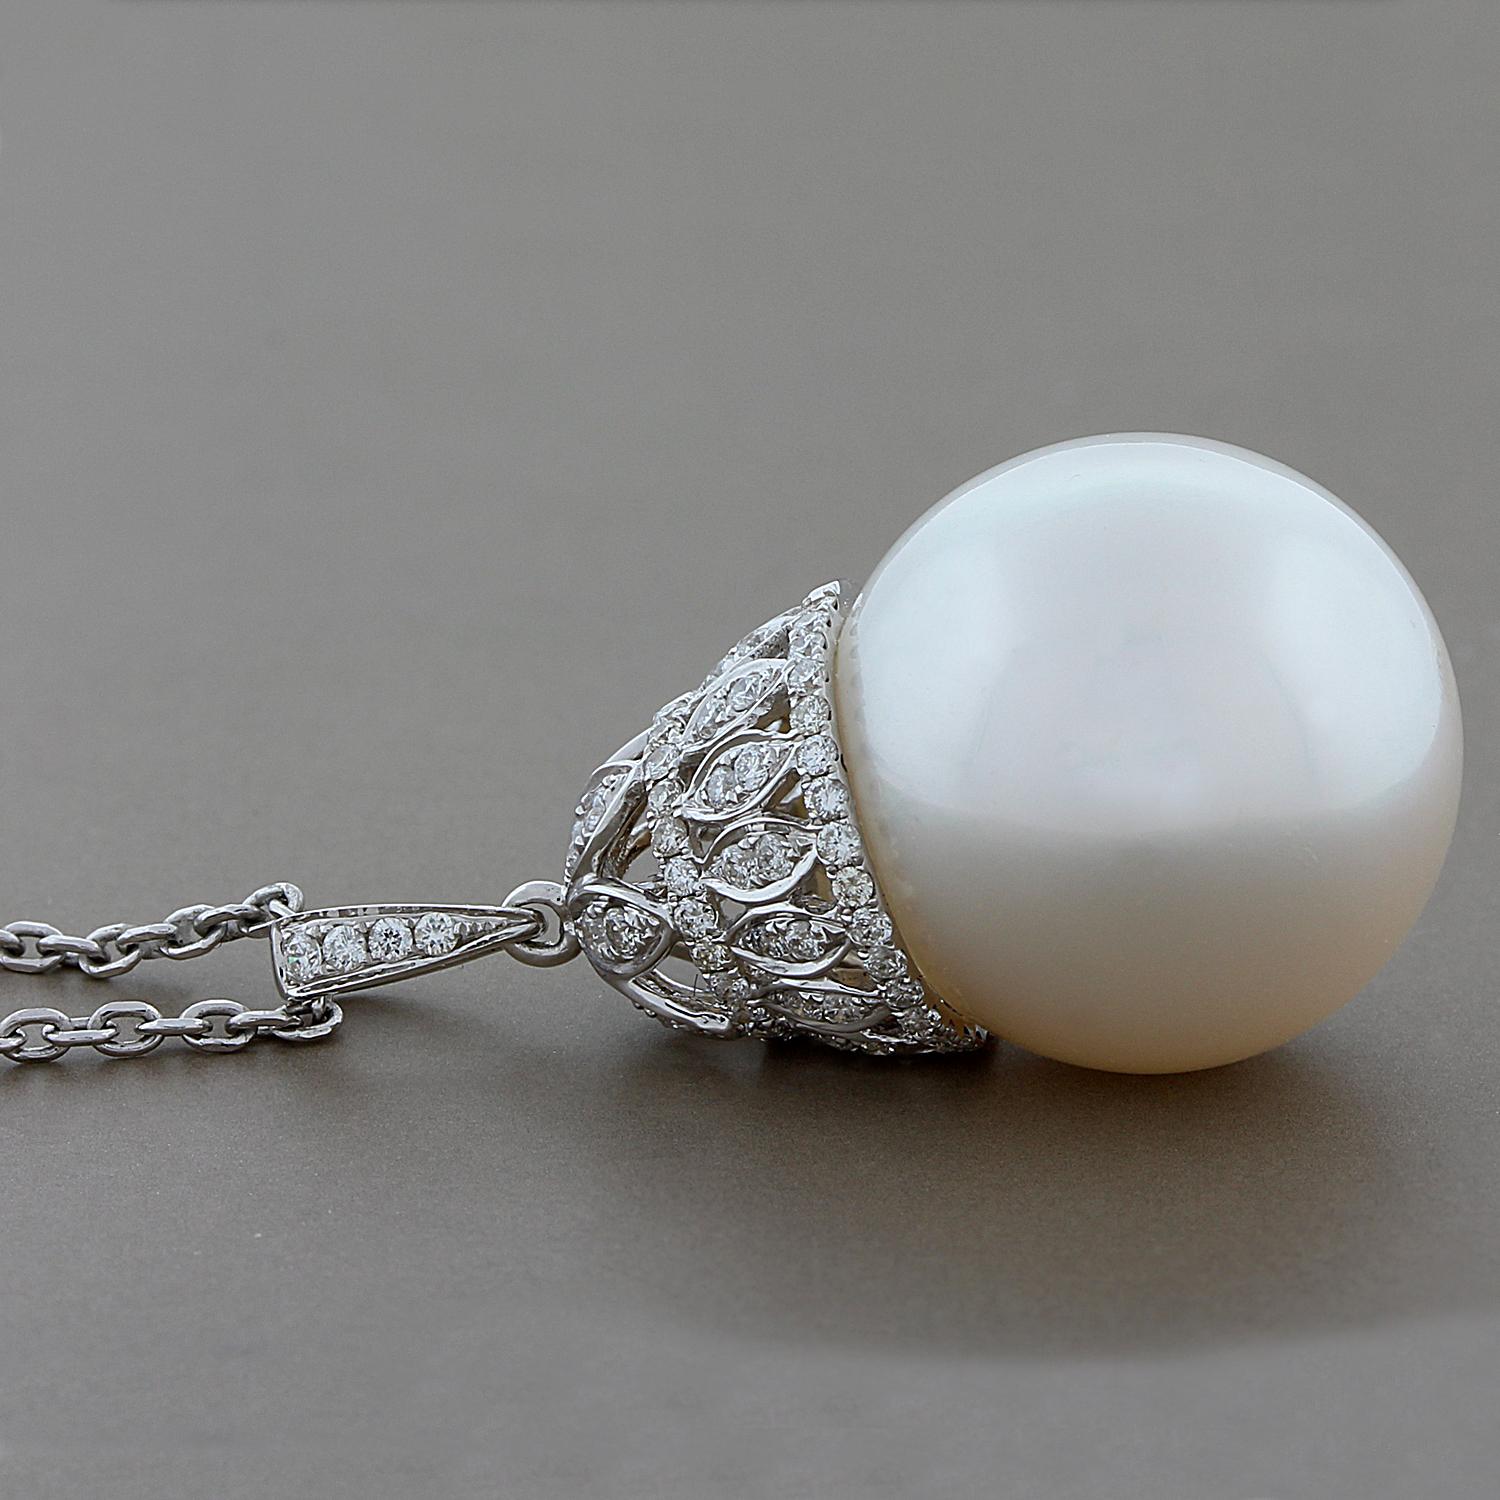 This feminine pendant features a lustrous 16.5 mm South Sea pearl with 0.40 carats of VS clarity round diamonds.  The pearl is lustrous and uniform in surface color all around.  A royal design set in 18K white gold. 

Chain Length: 18